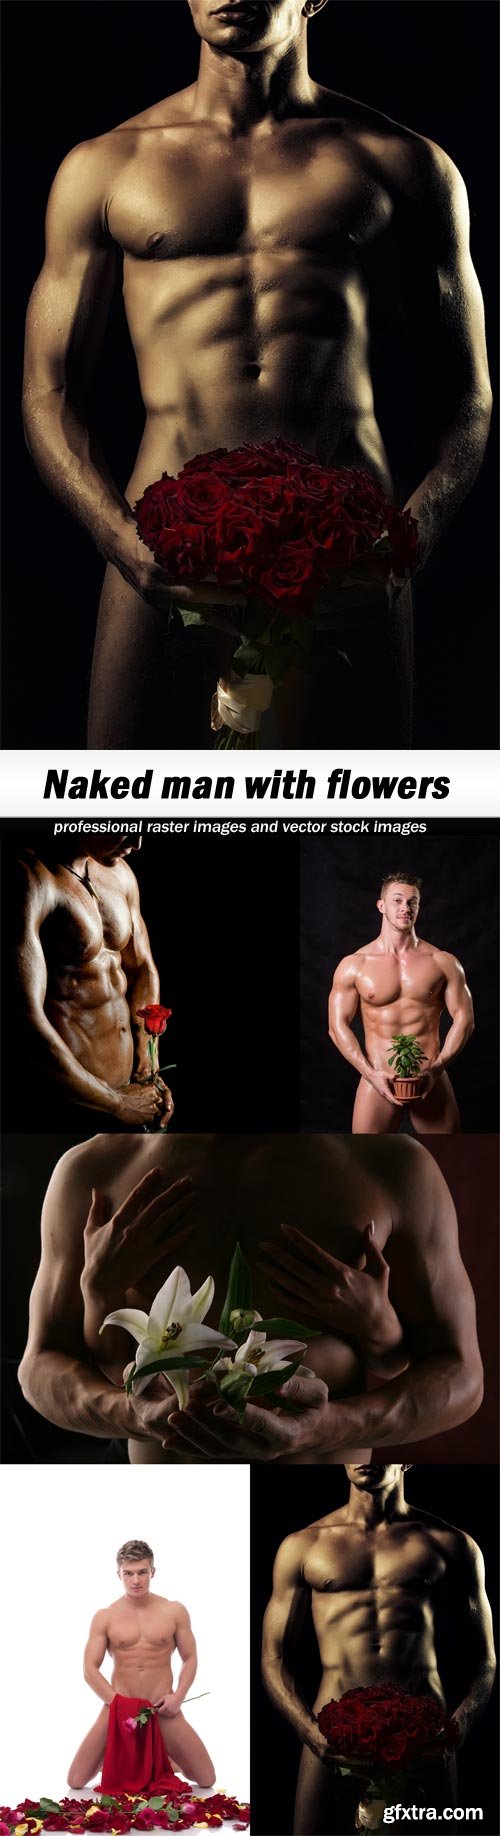 Naked man with flowers